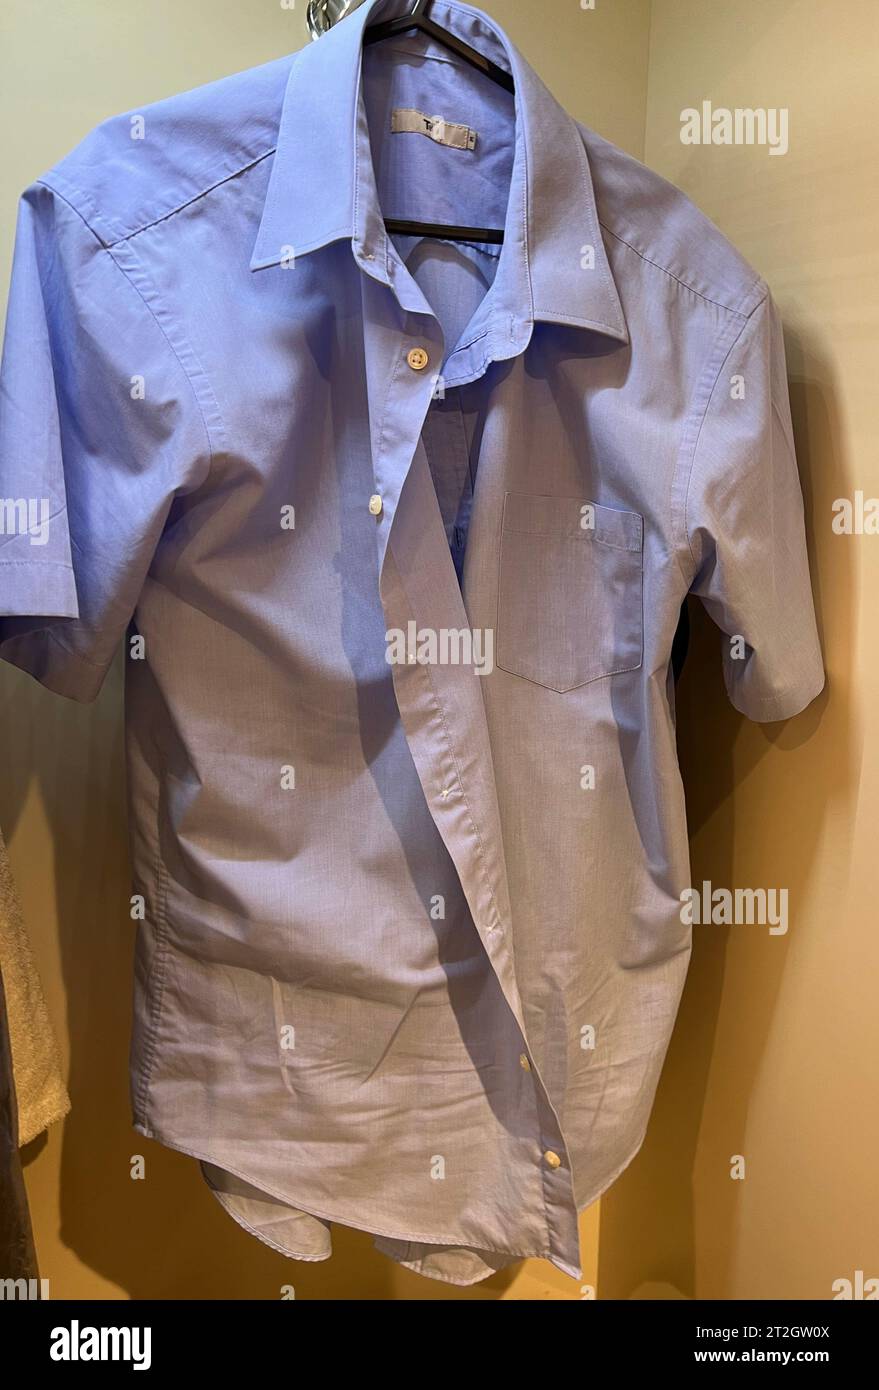 Crumpled shirt ready for laundry Stock Photo